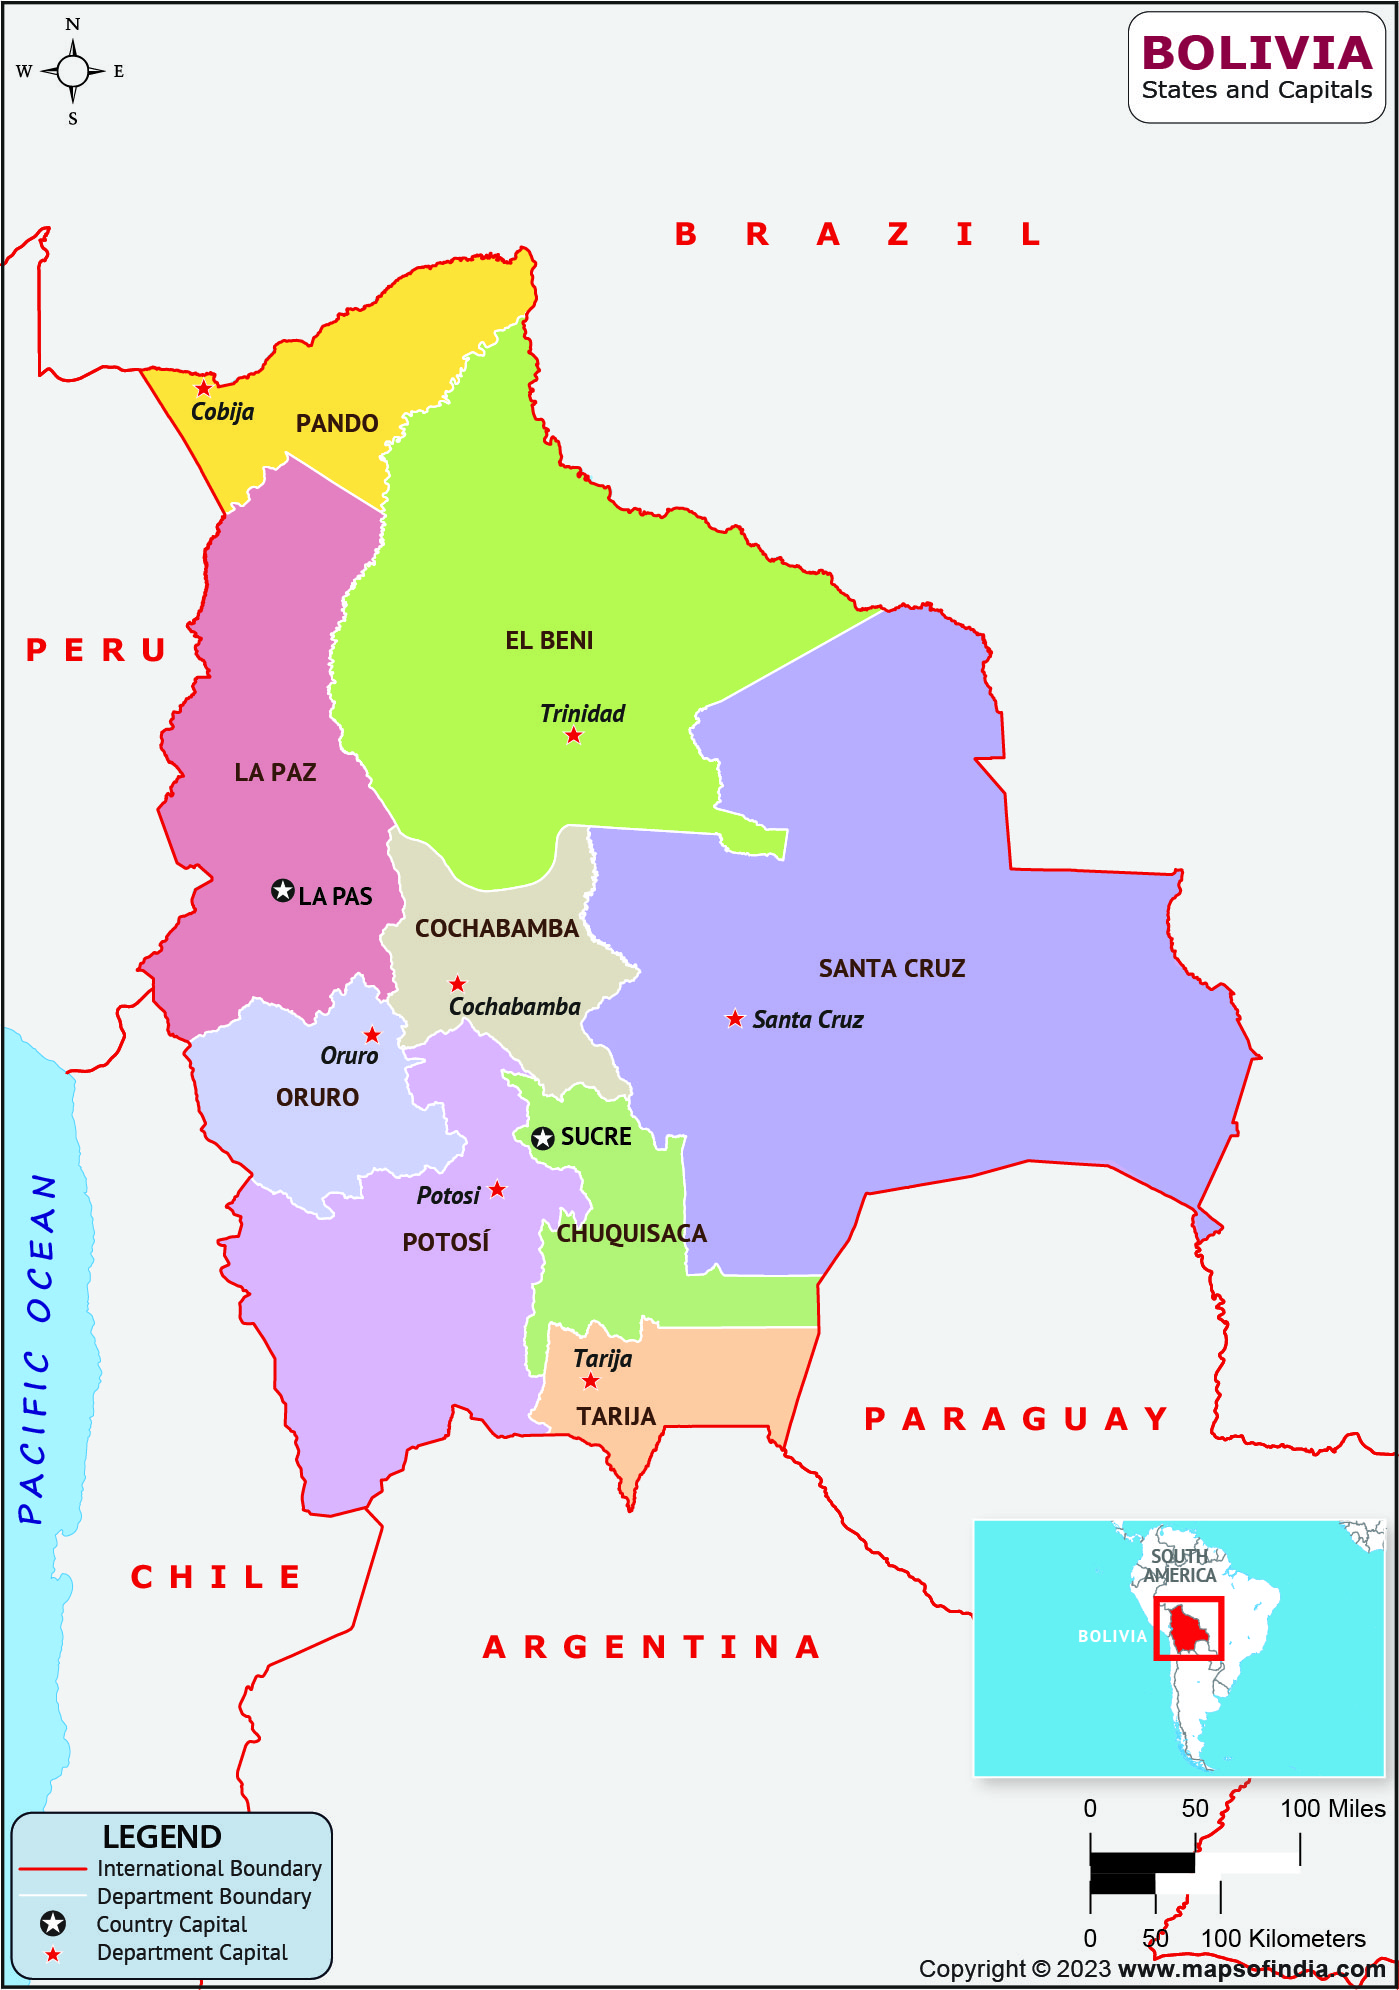 Bolivia Departments and Capitals List and Map | List of Departments and ...